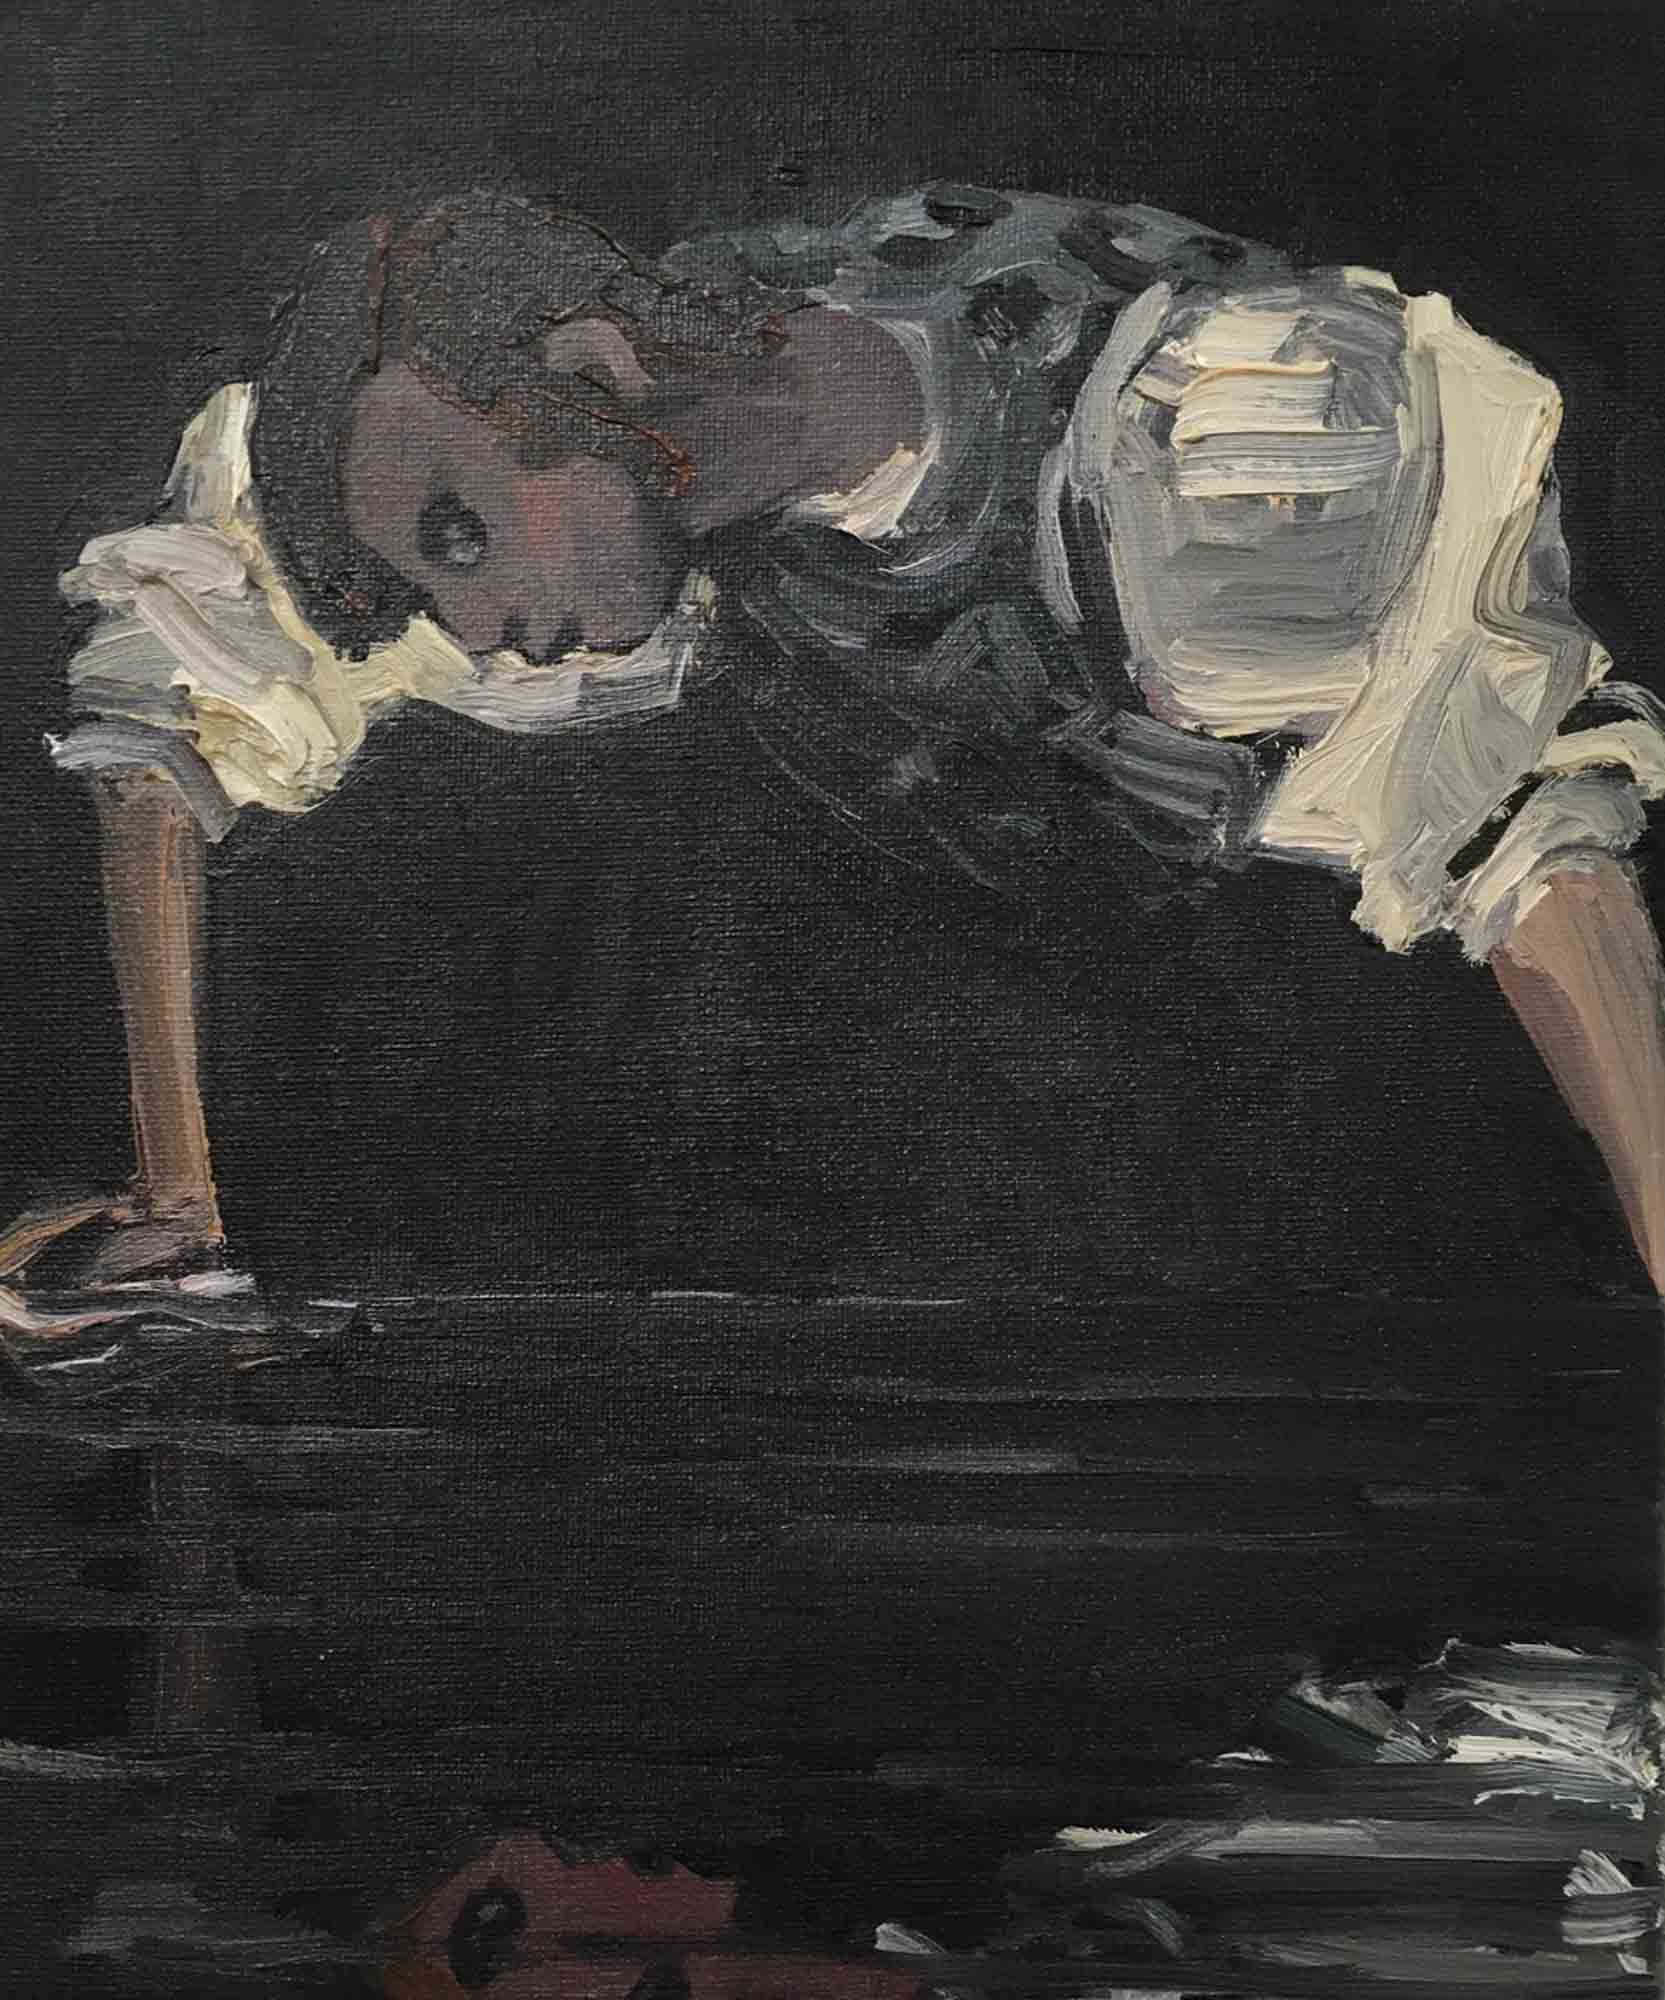 Narcissus (after Carravagio)